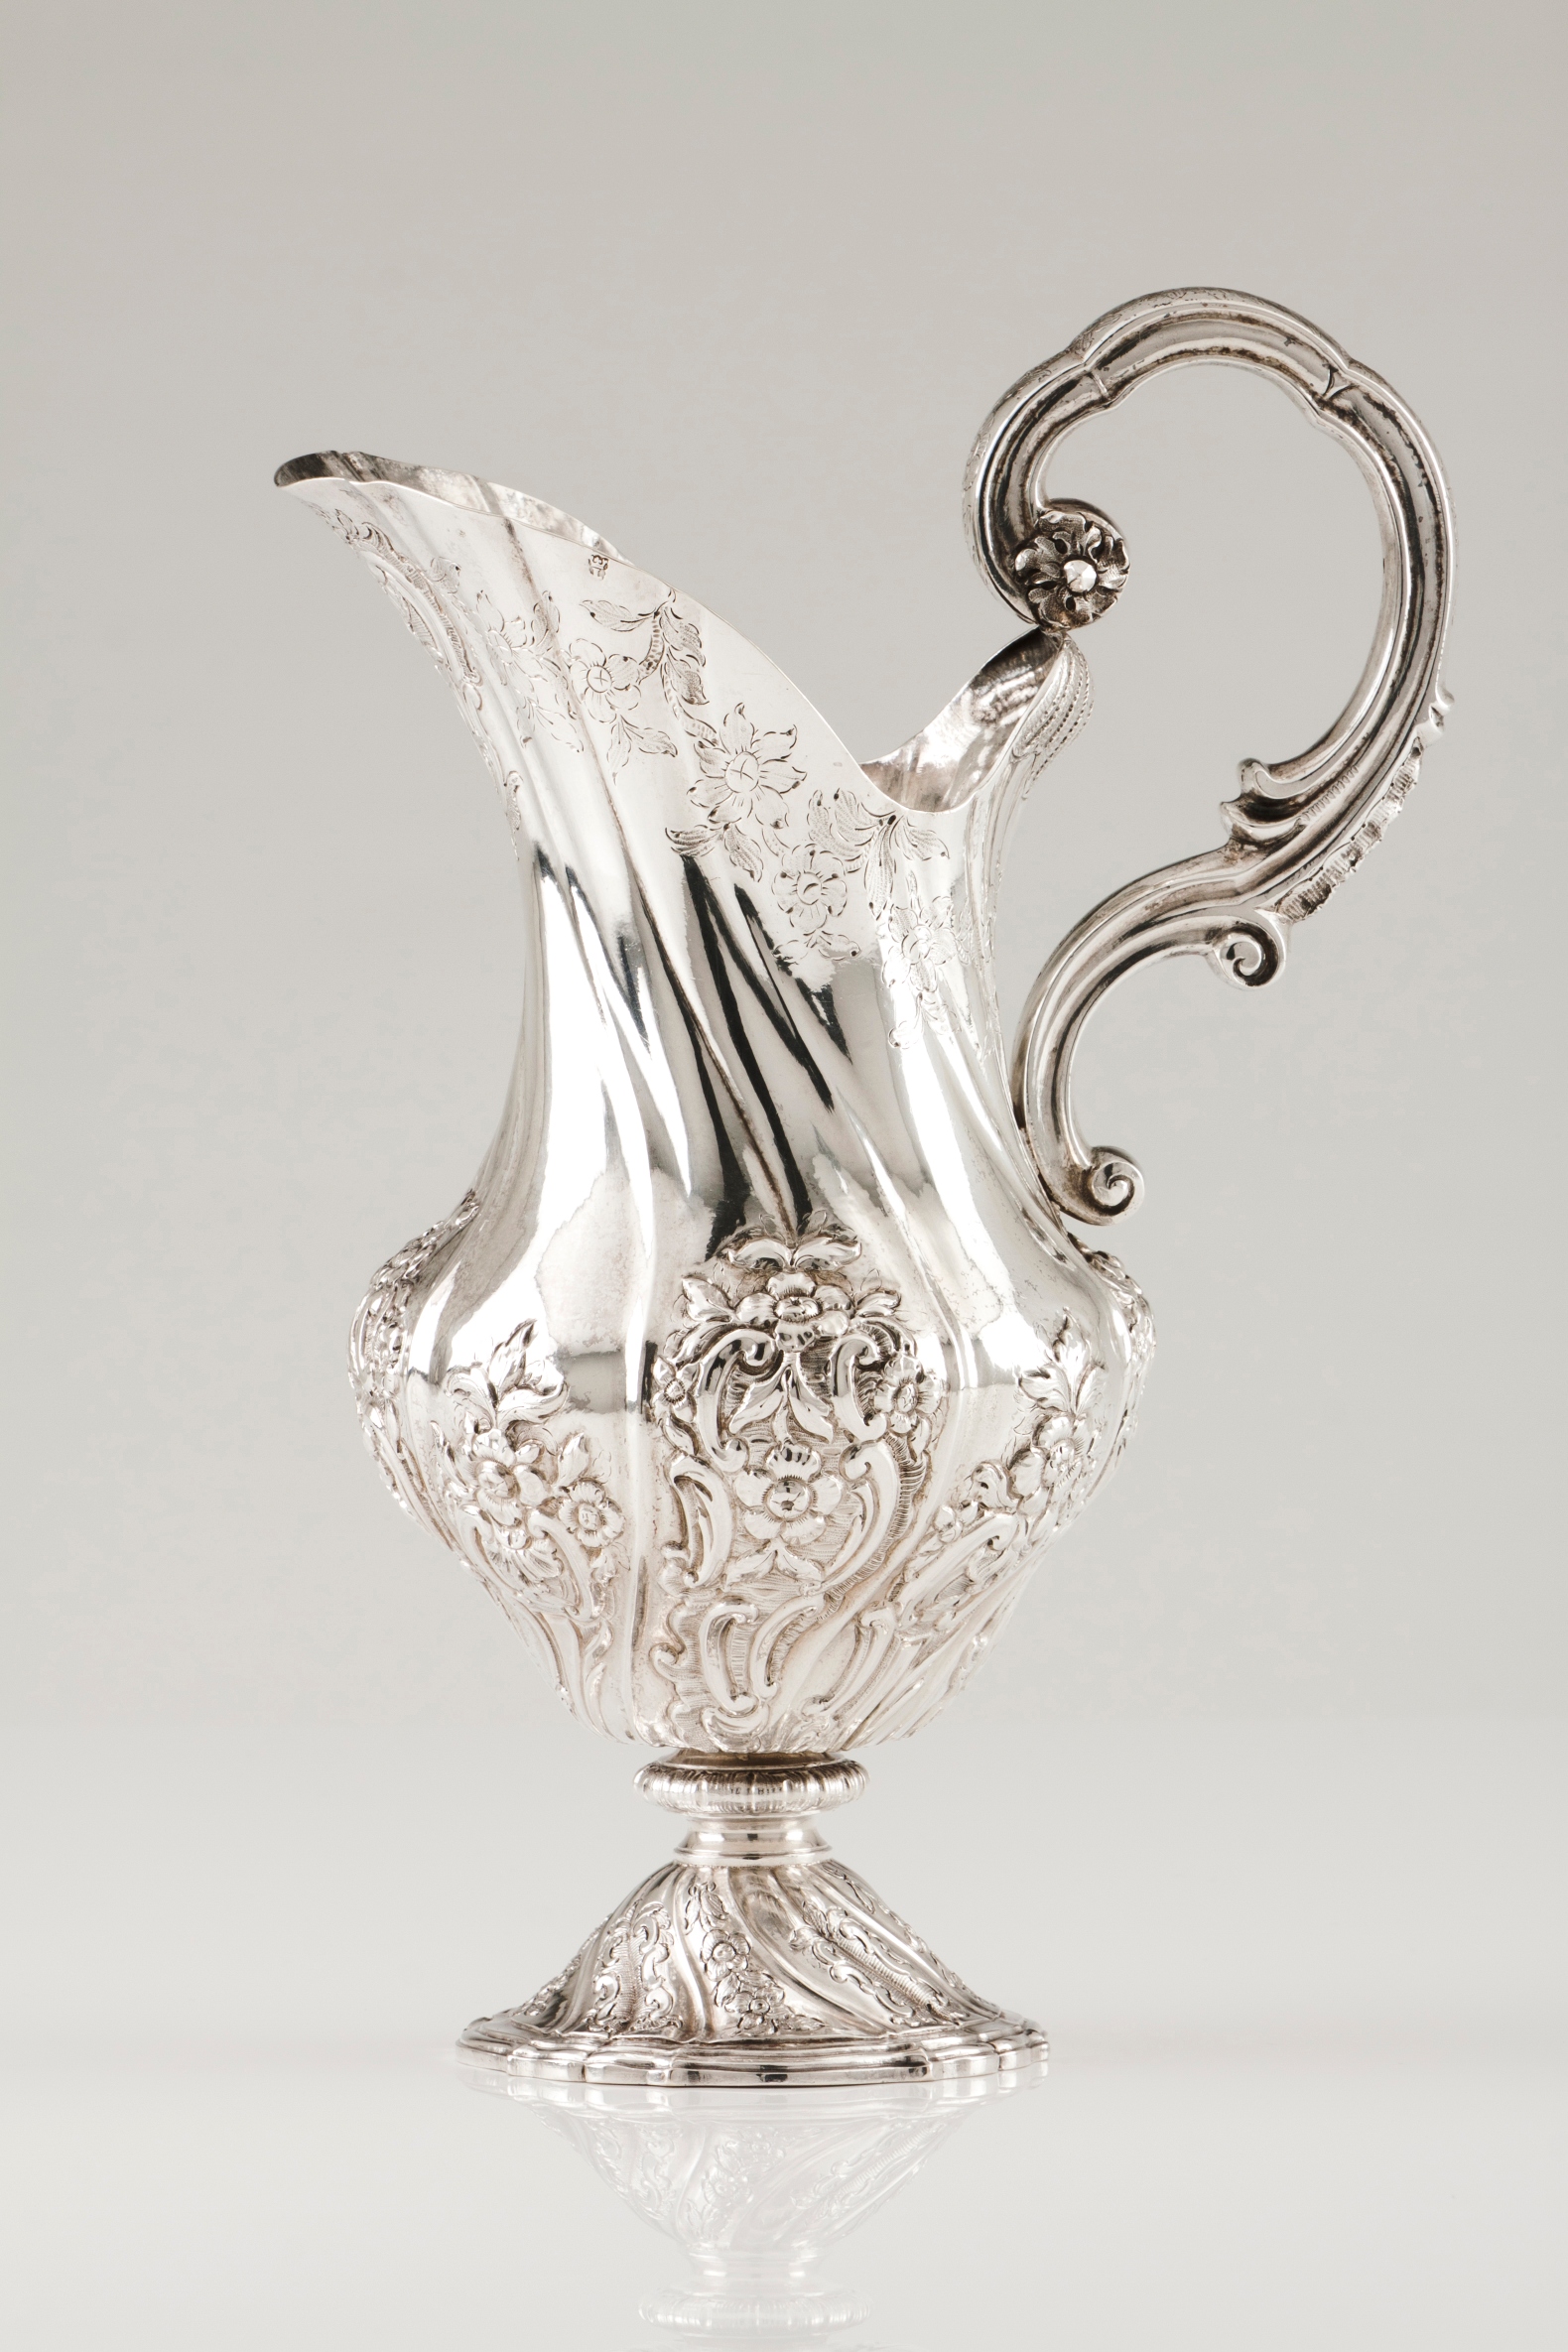 A D.João V / D.José ewer and basinPortuguese silver, 18th century Spiralled body of raised and c - Image 3 of 4